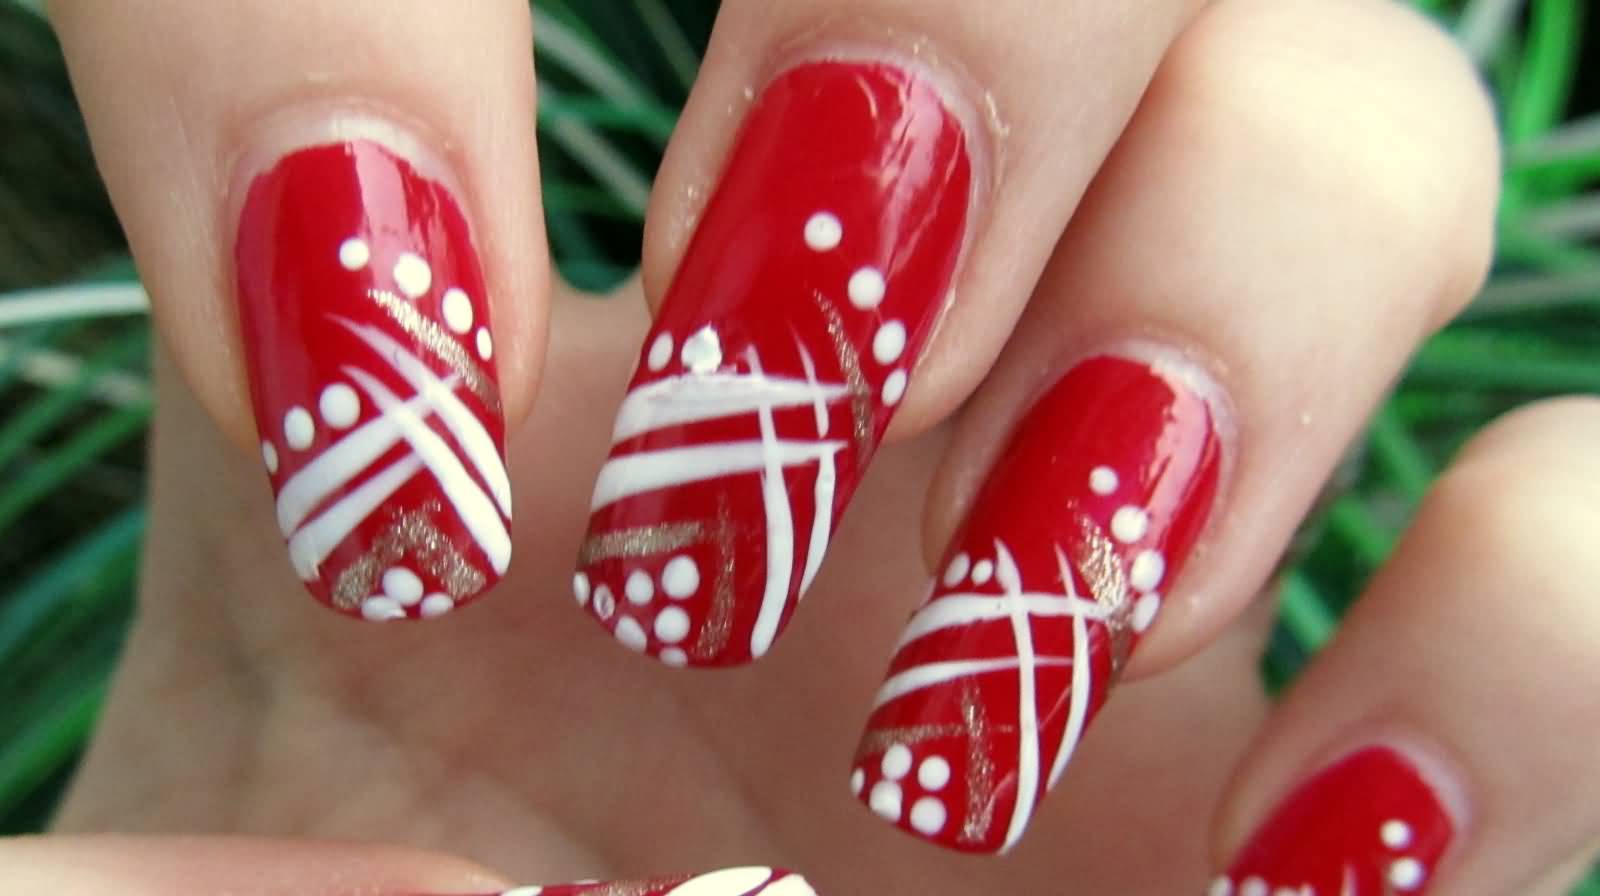 Red Nails With White Acrylic Stripes Design Nail Art